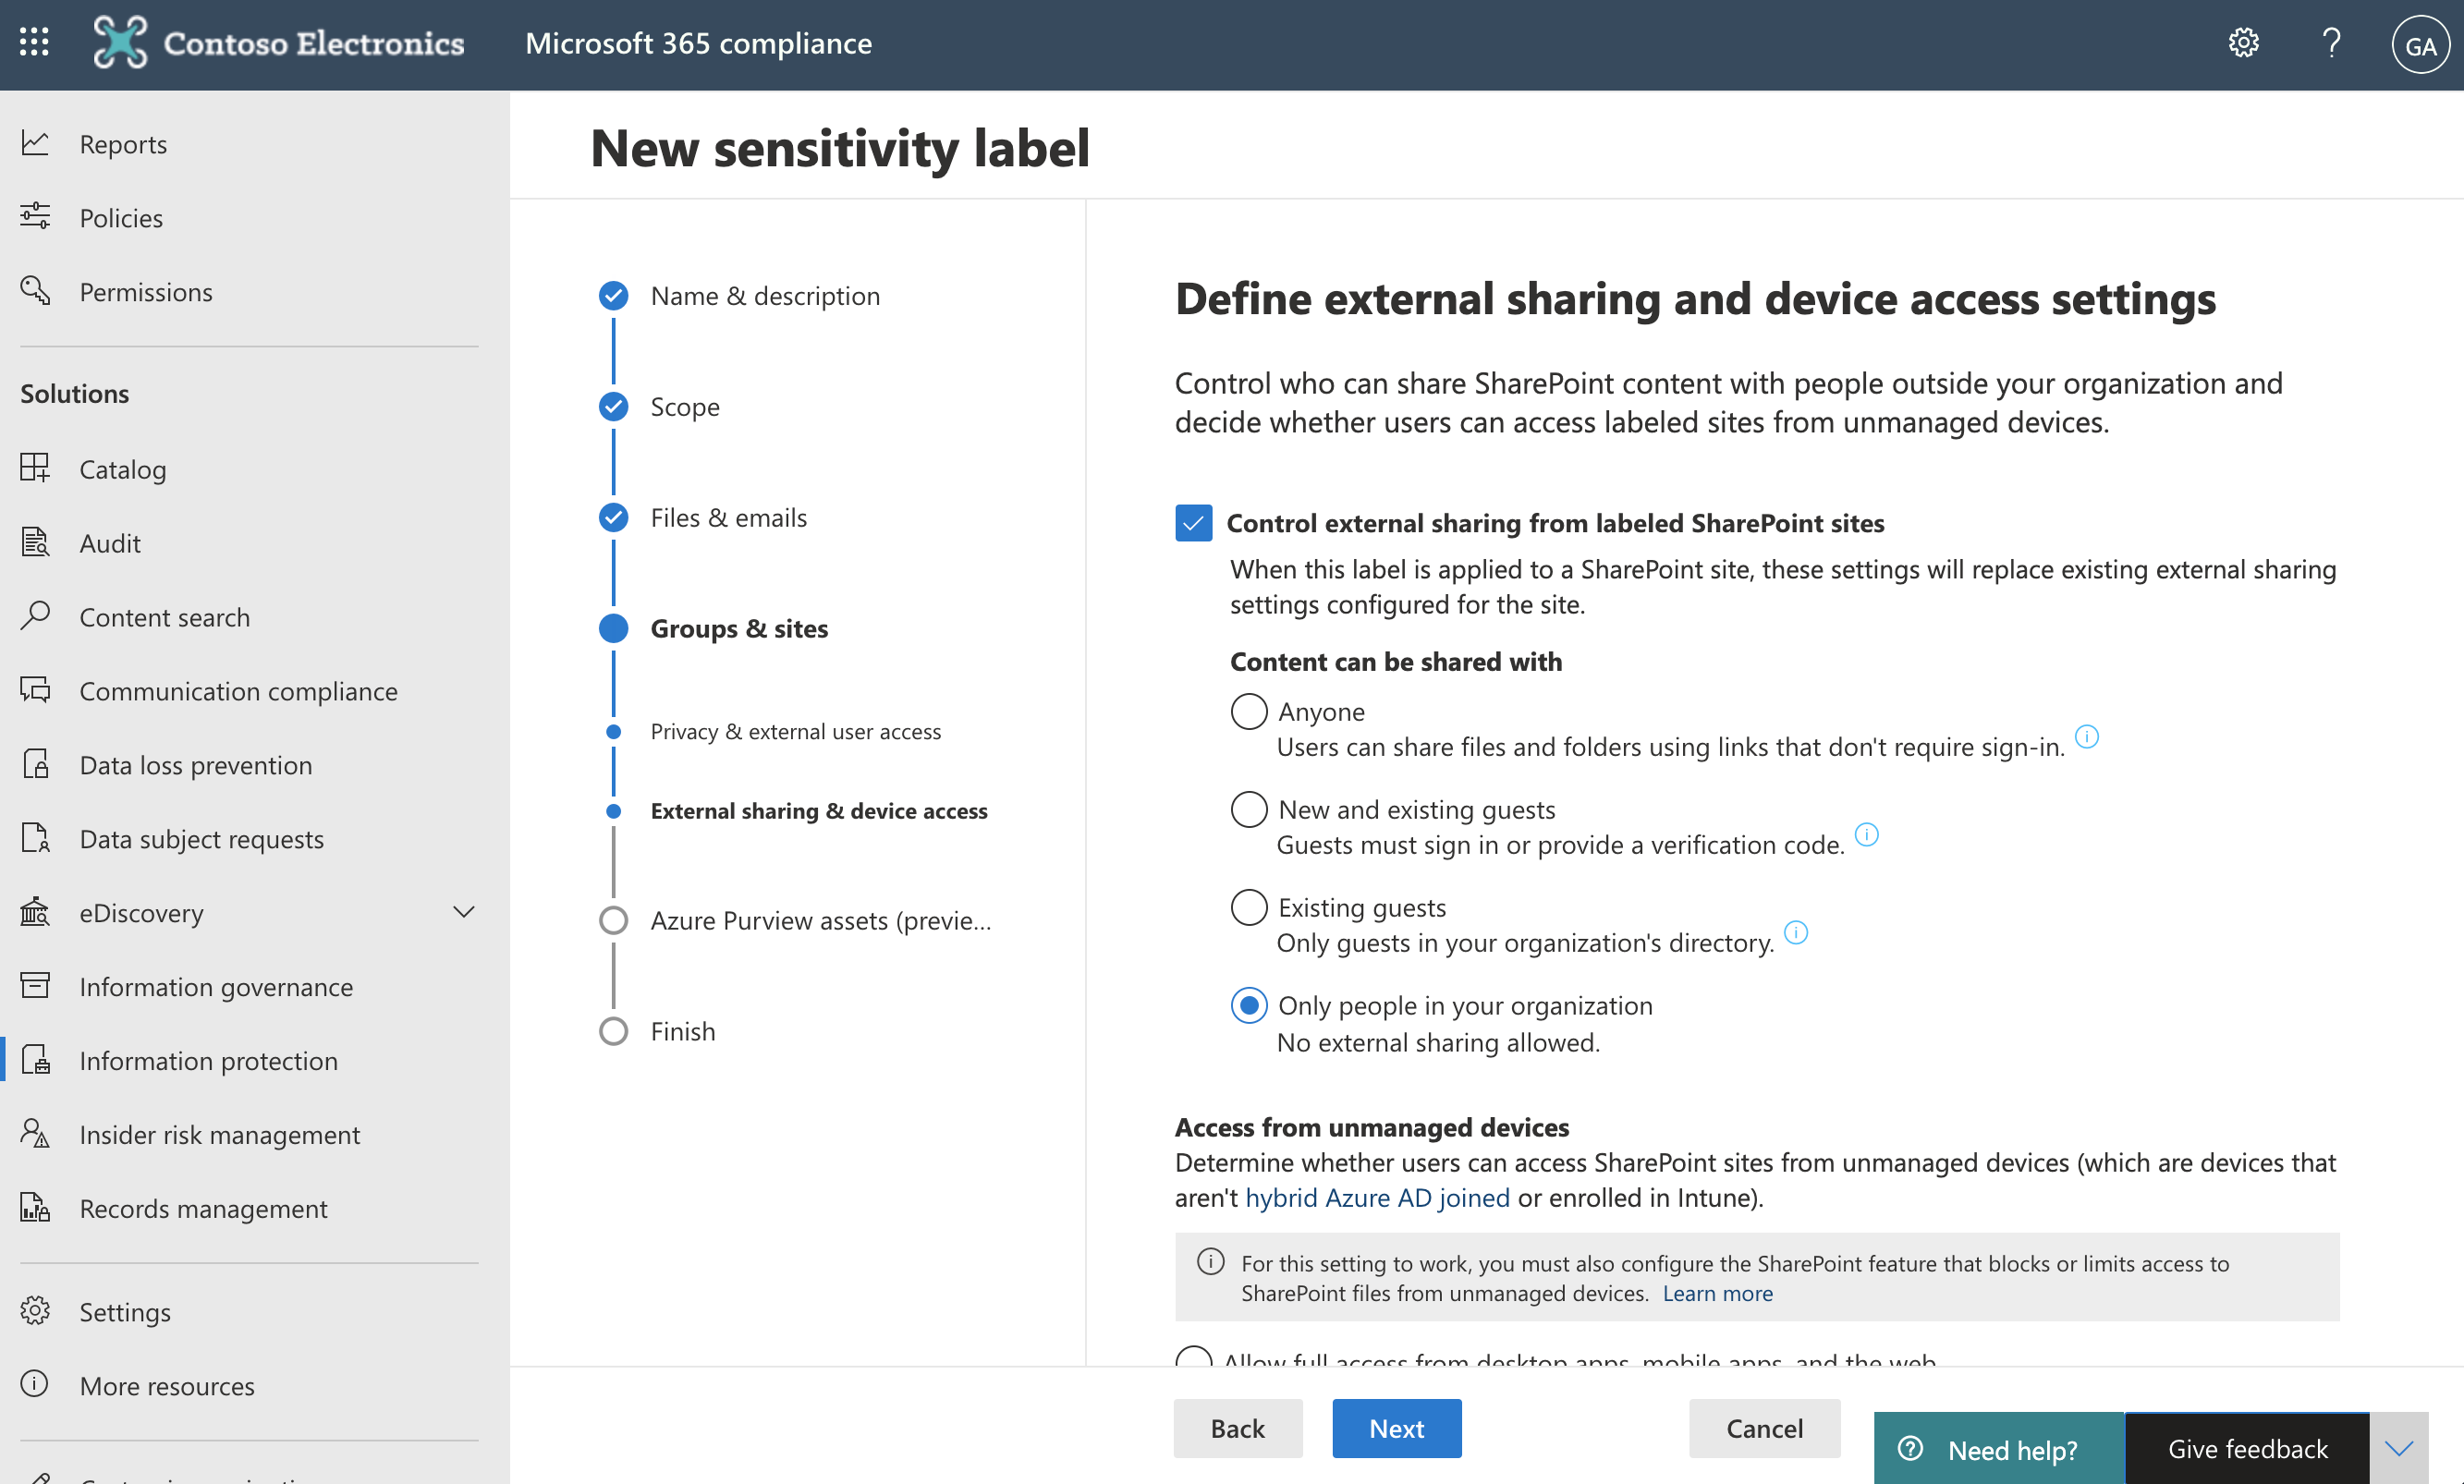 Screenshot of Control external sharing from labeled SharePoint sites settings.